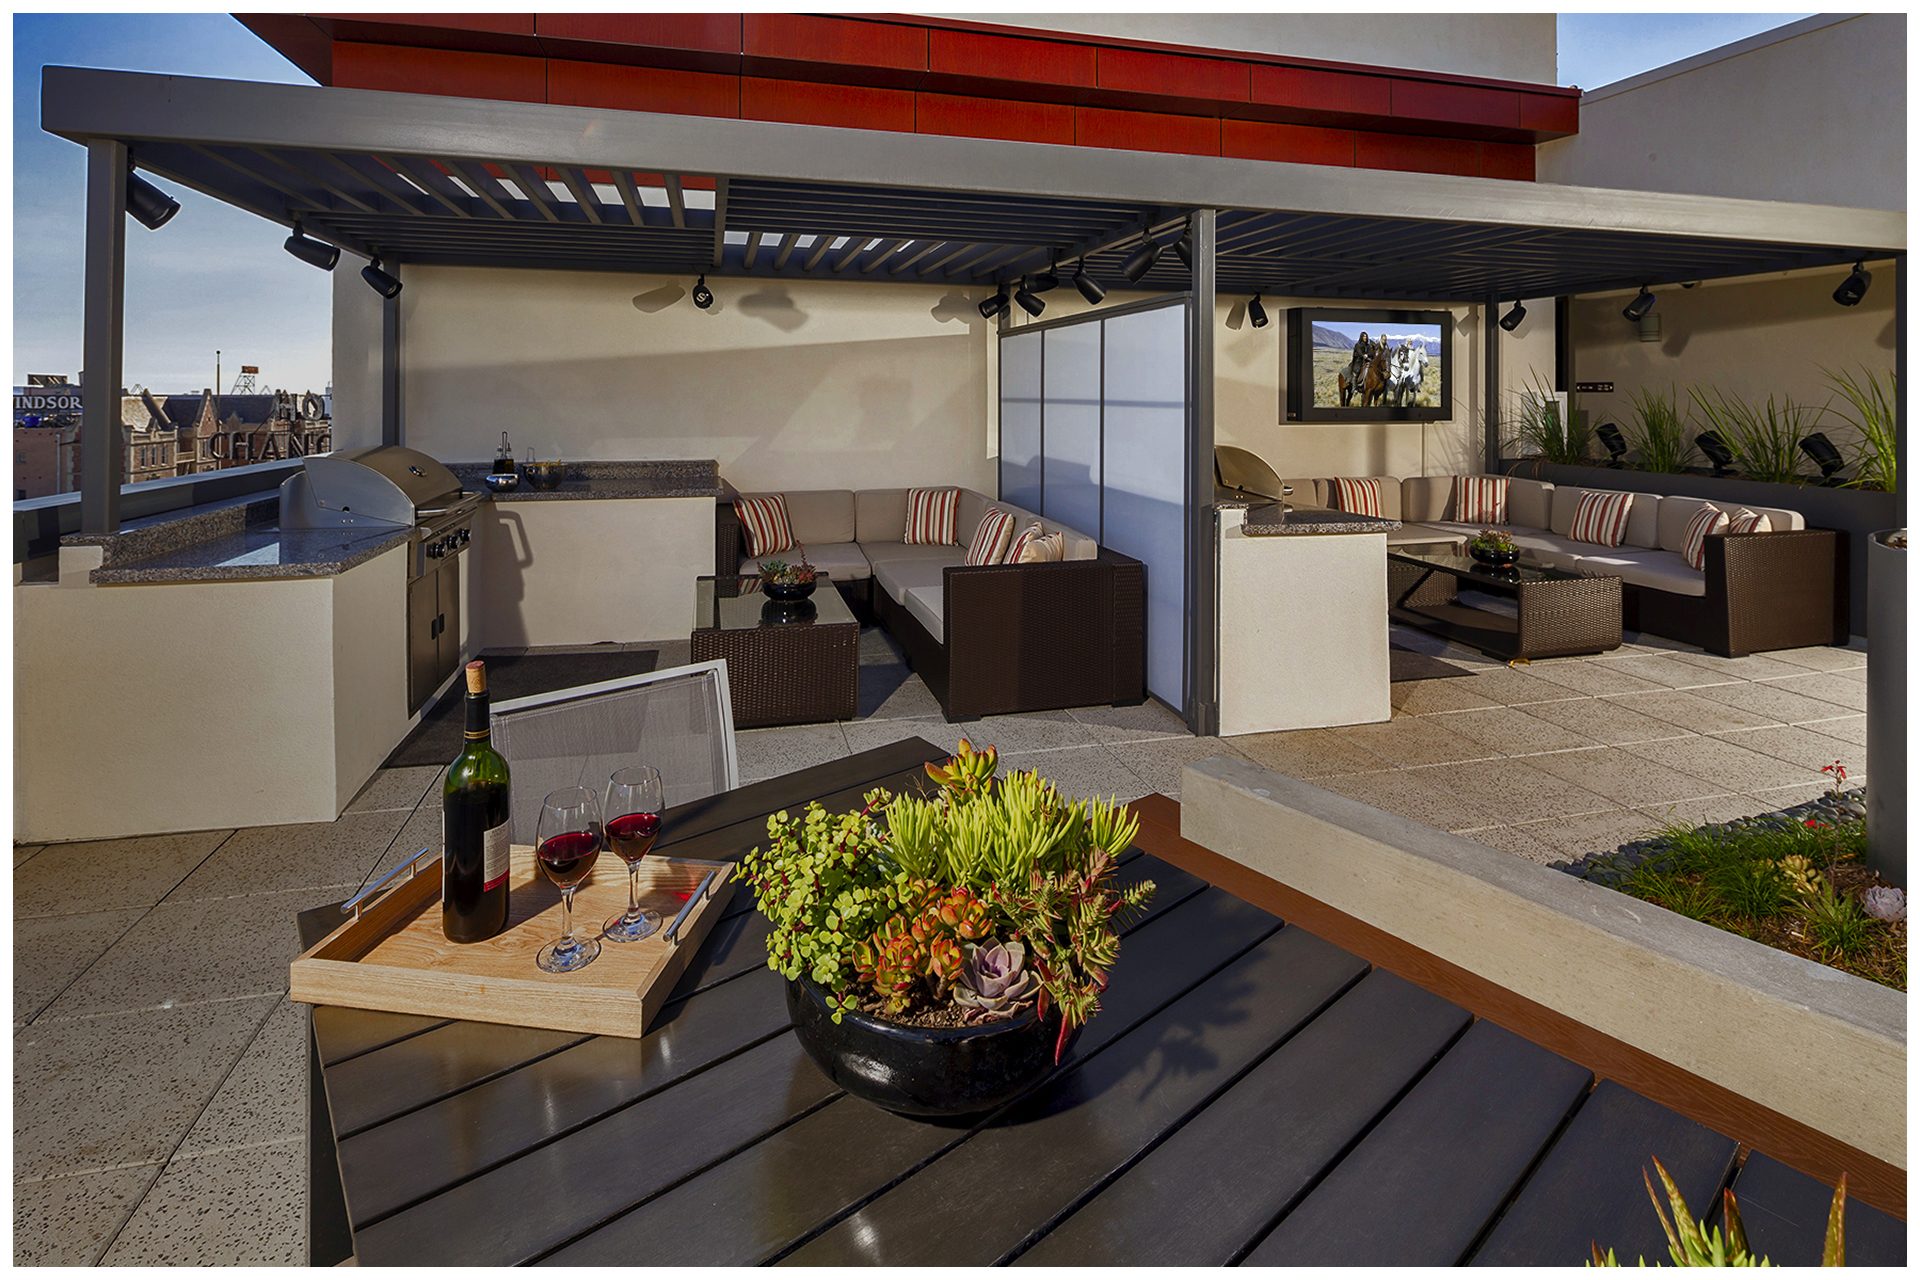 ROOFTOP/SKY DECK PROVISIONS Roof-top Audio & TV & WiFi; AV provisions controlled from leasing office.